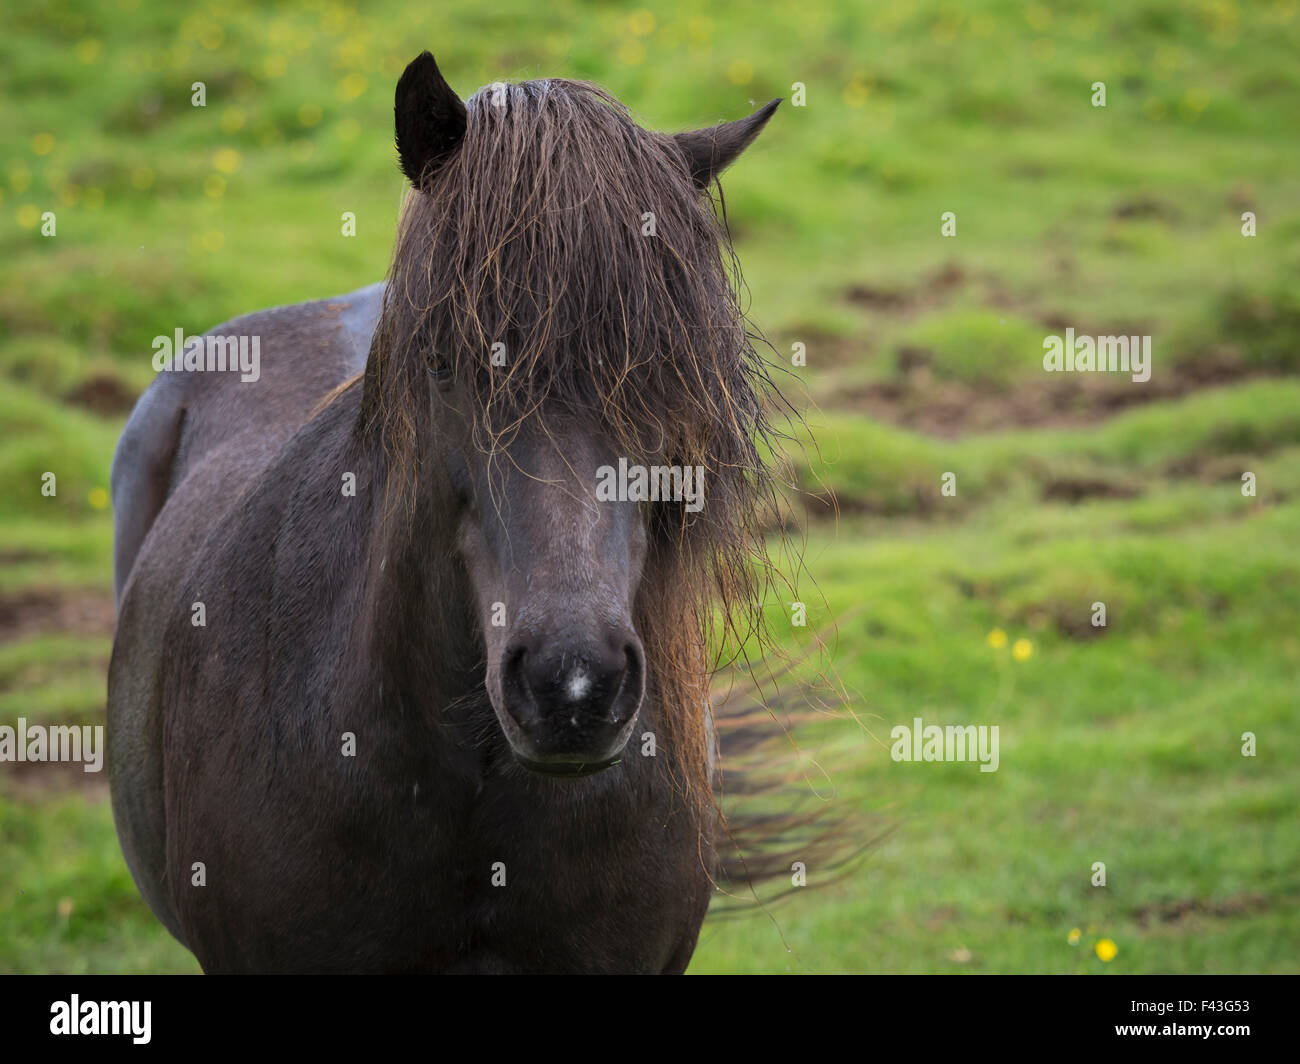 An Icelandic horse with dark coat and long black mane. Front view. Stock Photo